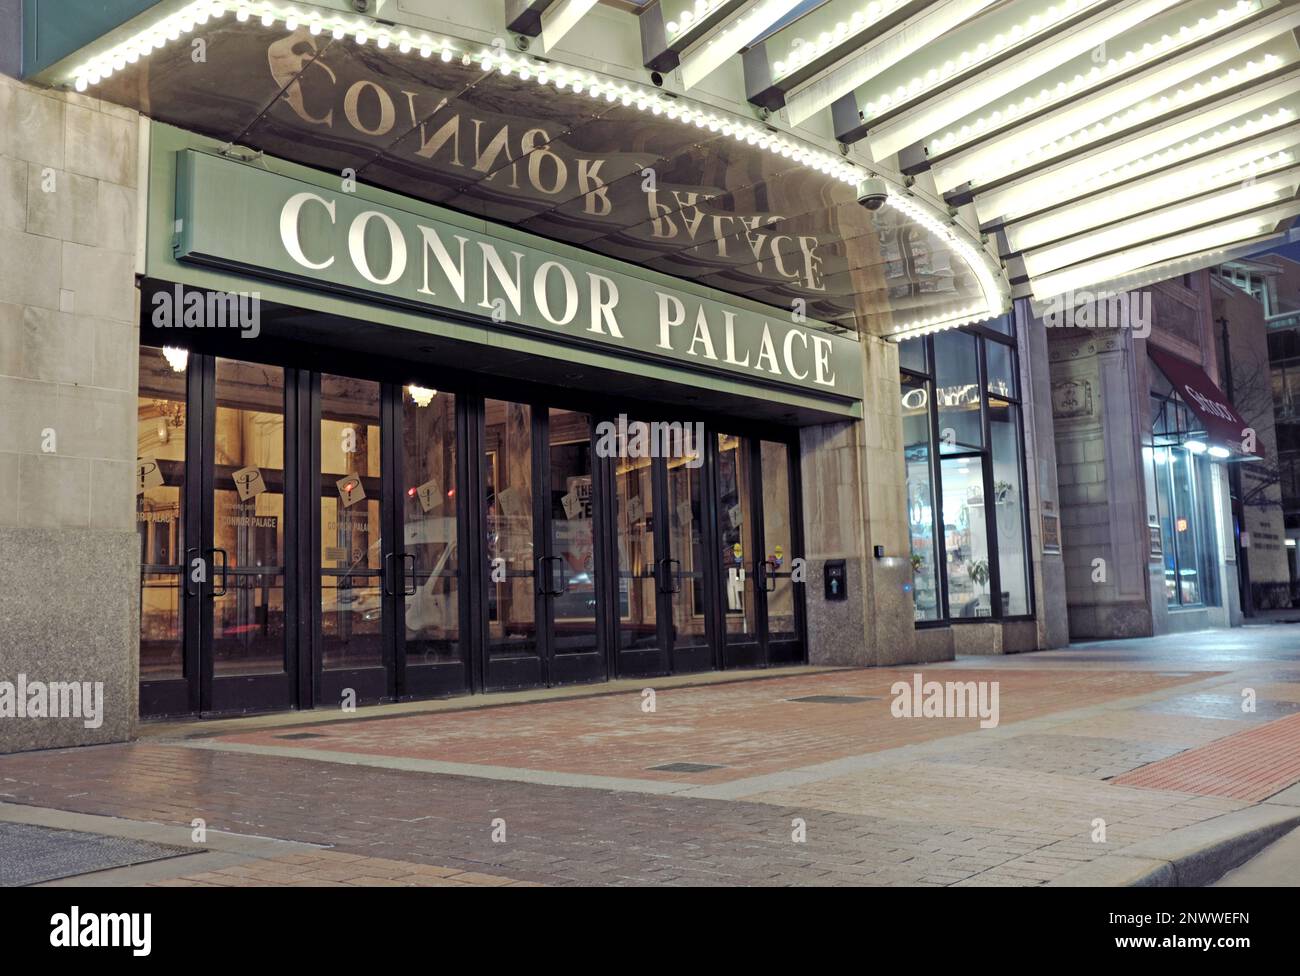 The Connor Palace, the French Renaissance Style theater opened in 1922, is part of the Playhouse Square theater district in Cleveland, Ohio, USA. Stock Photo